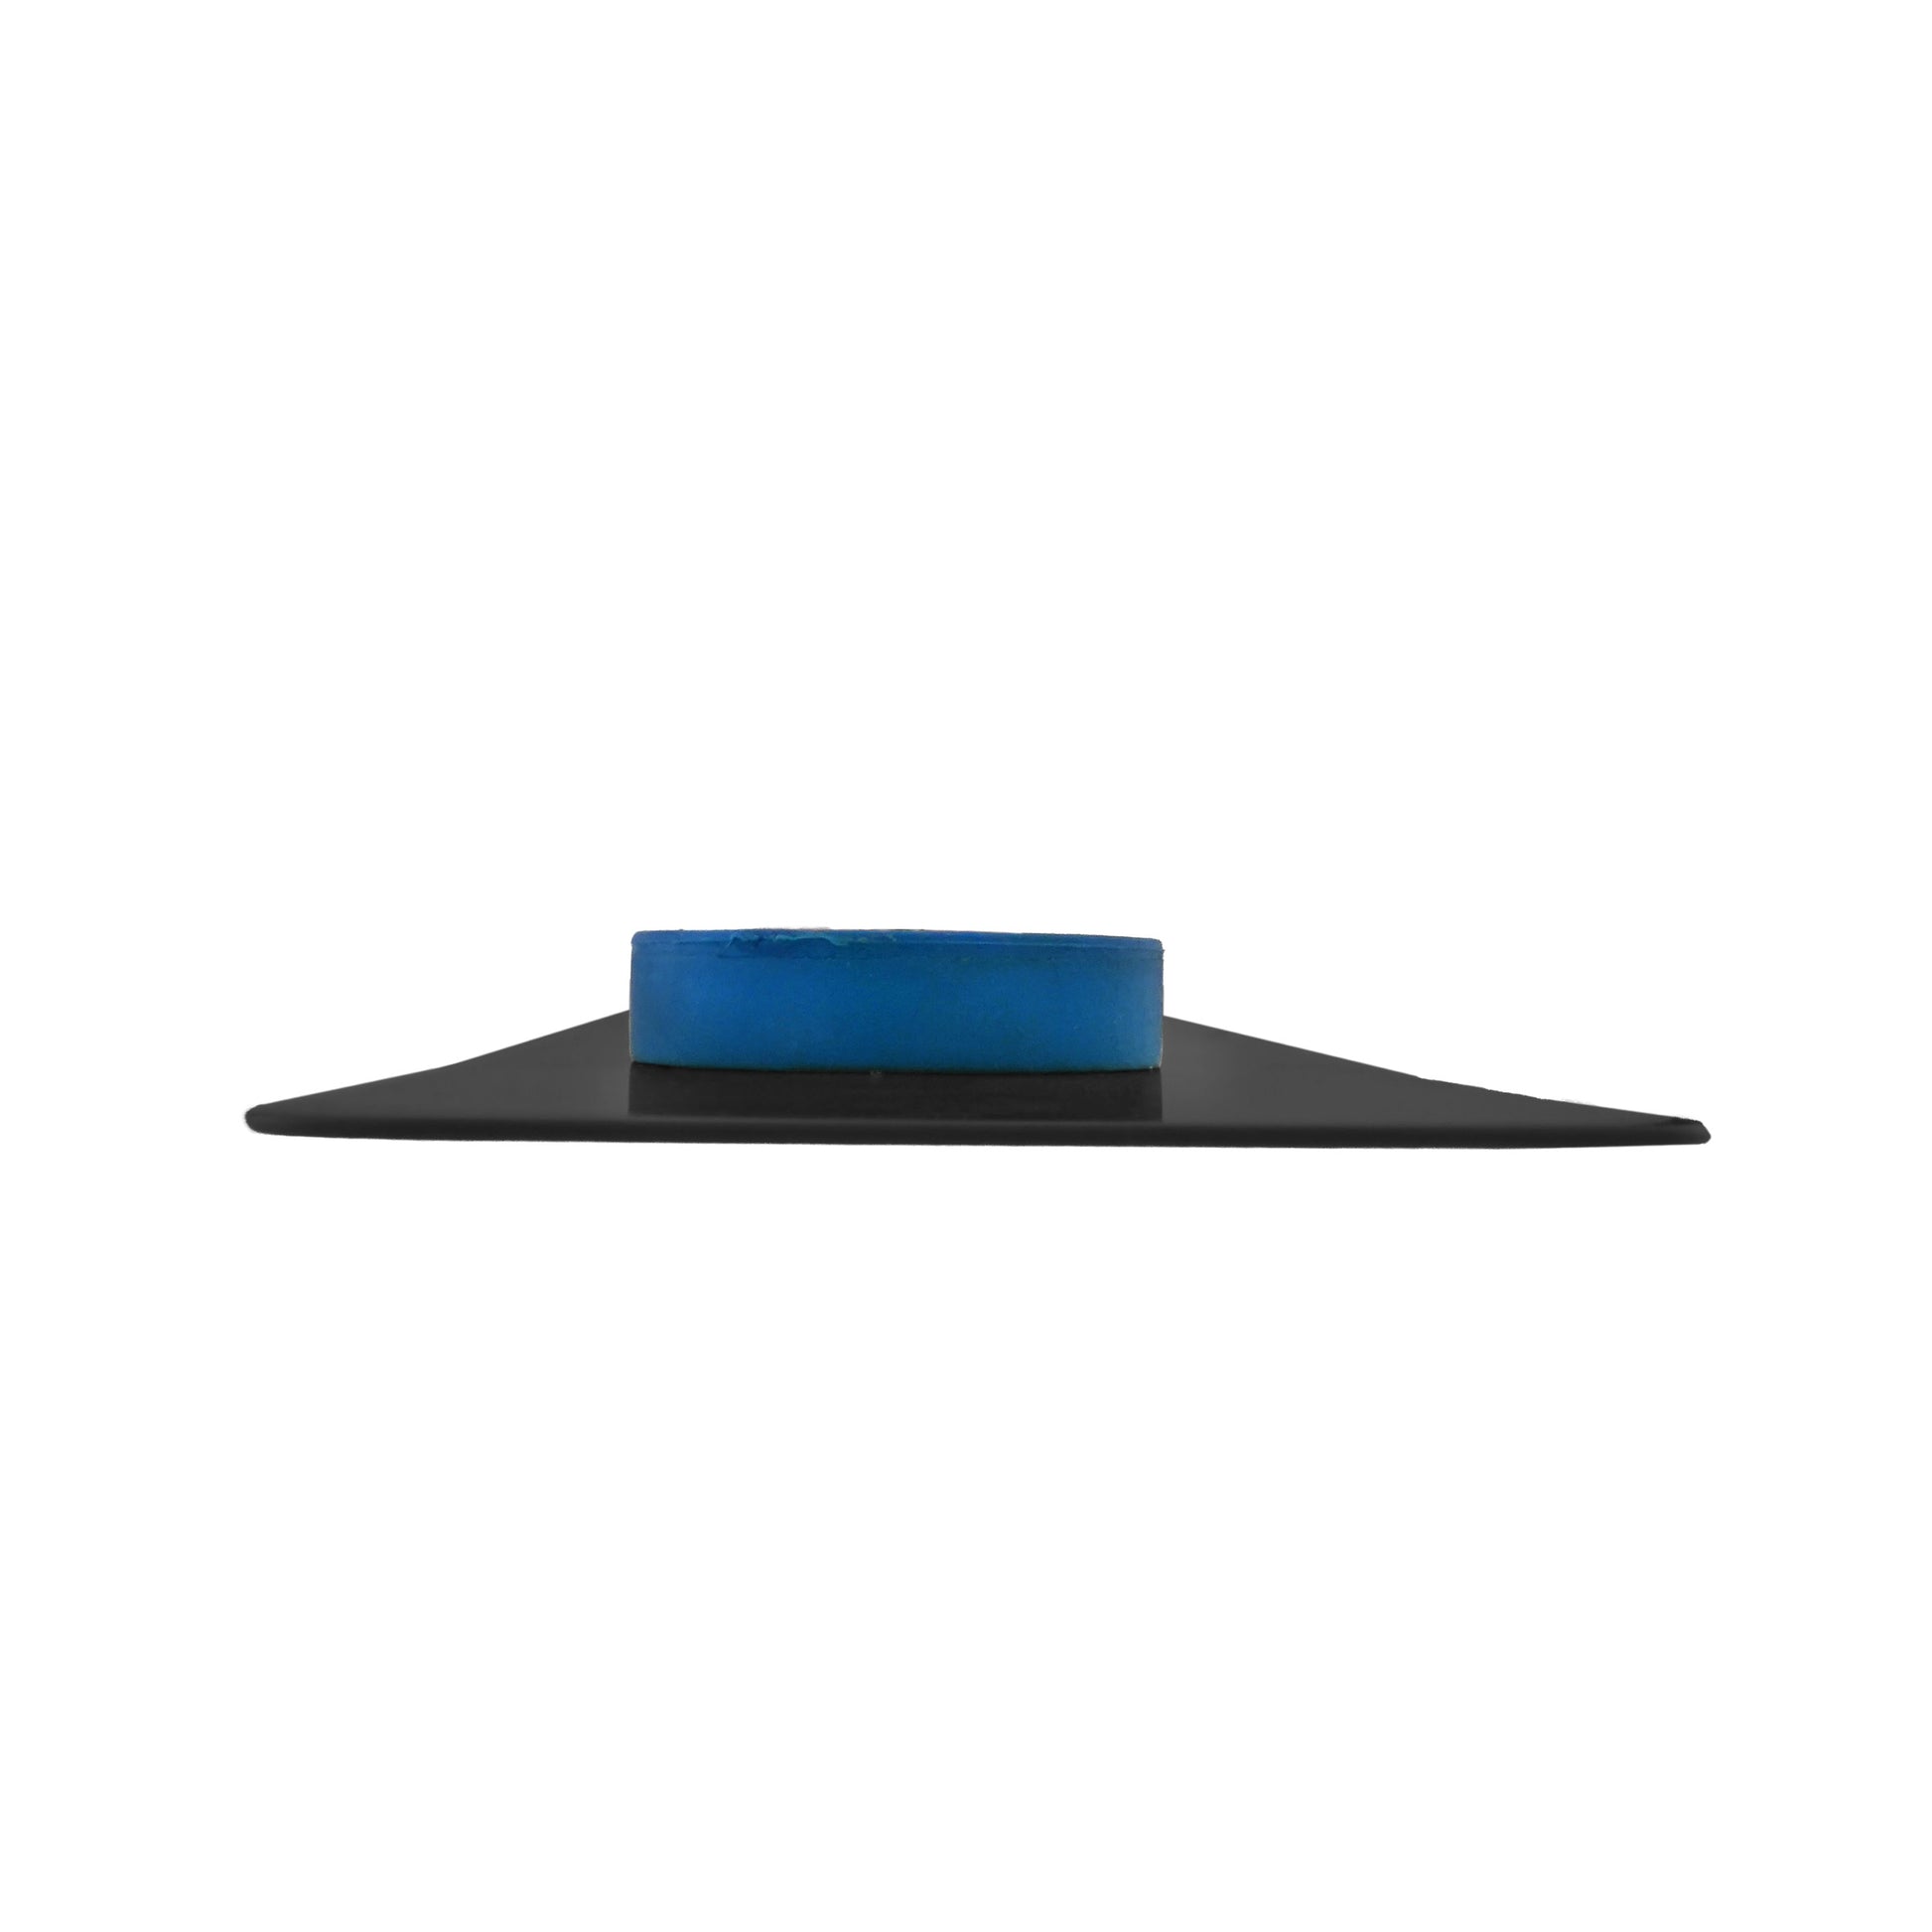 Load image into Gallery viewer, 08045 Magnetic Bulletin Bar - Black - 45 Degree Angle View